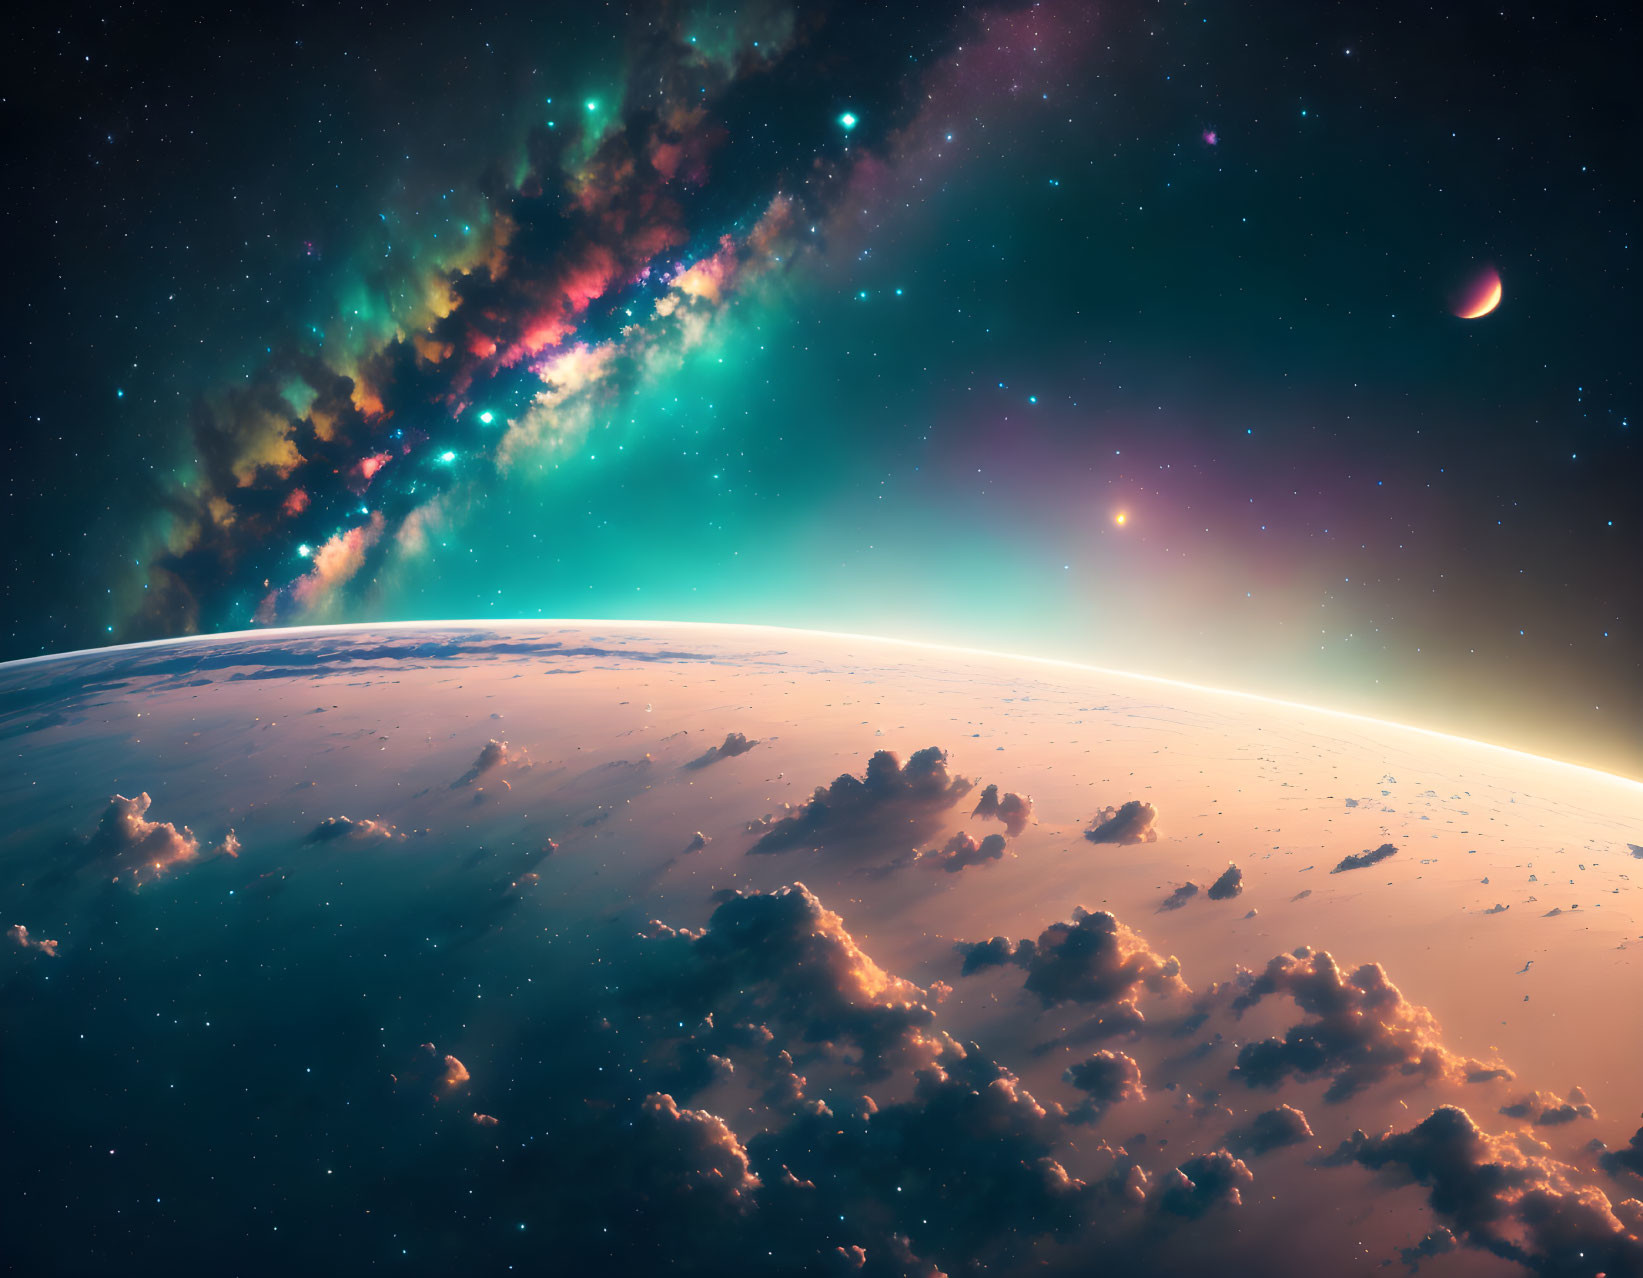 Colorful space scene with planet, nebula, stars, and moon